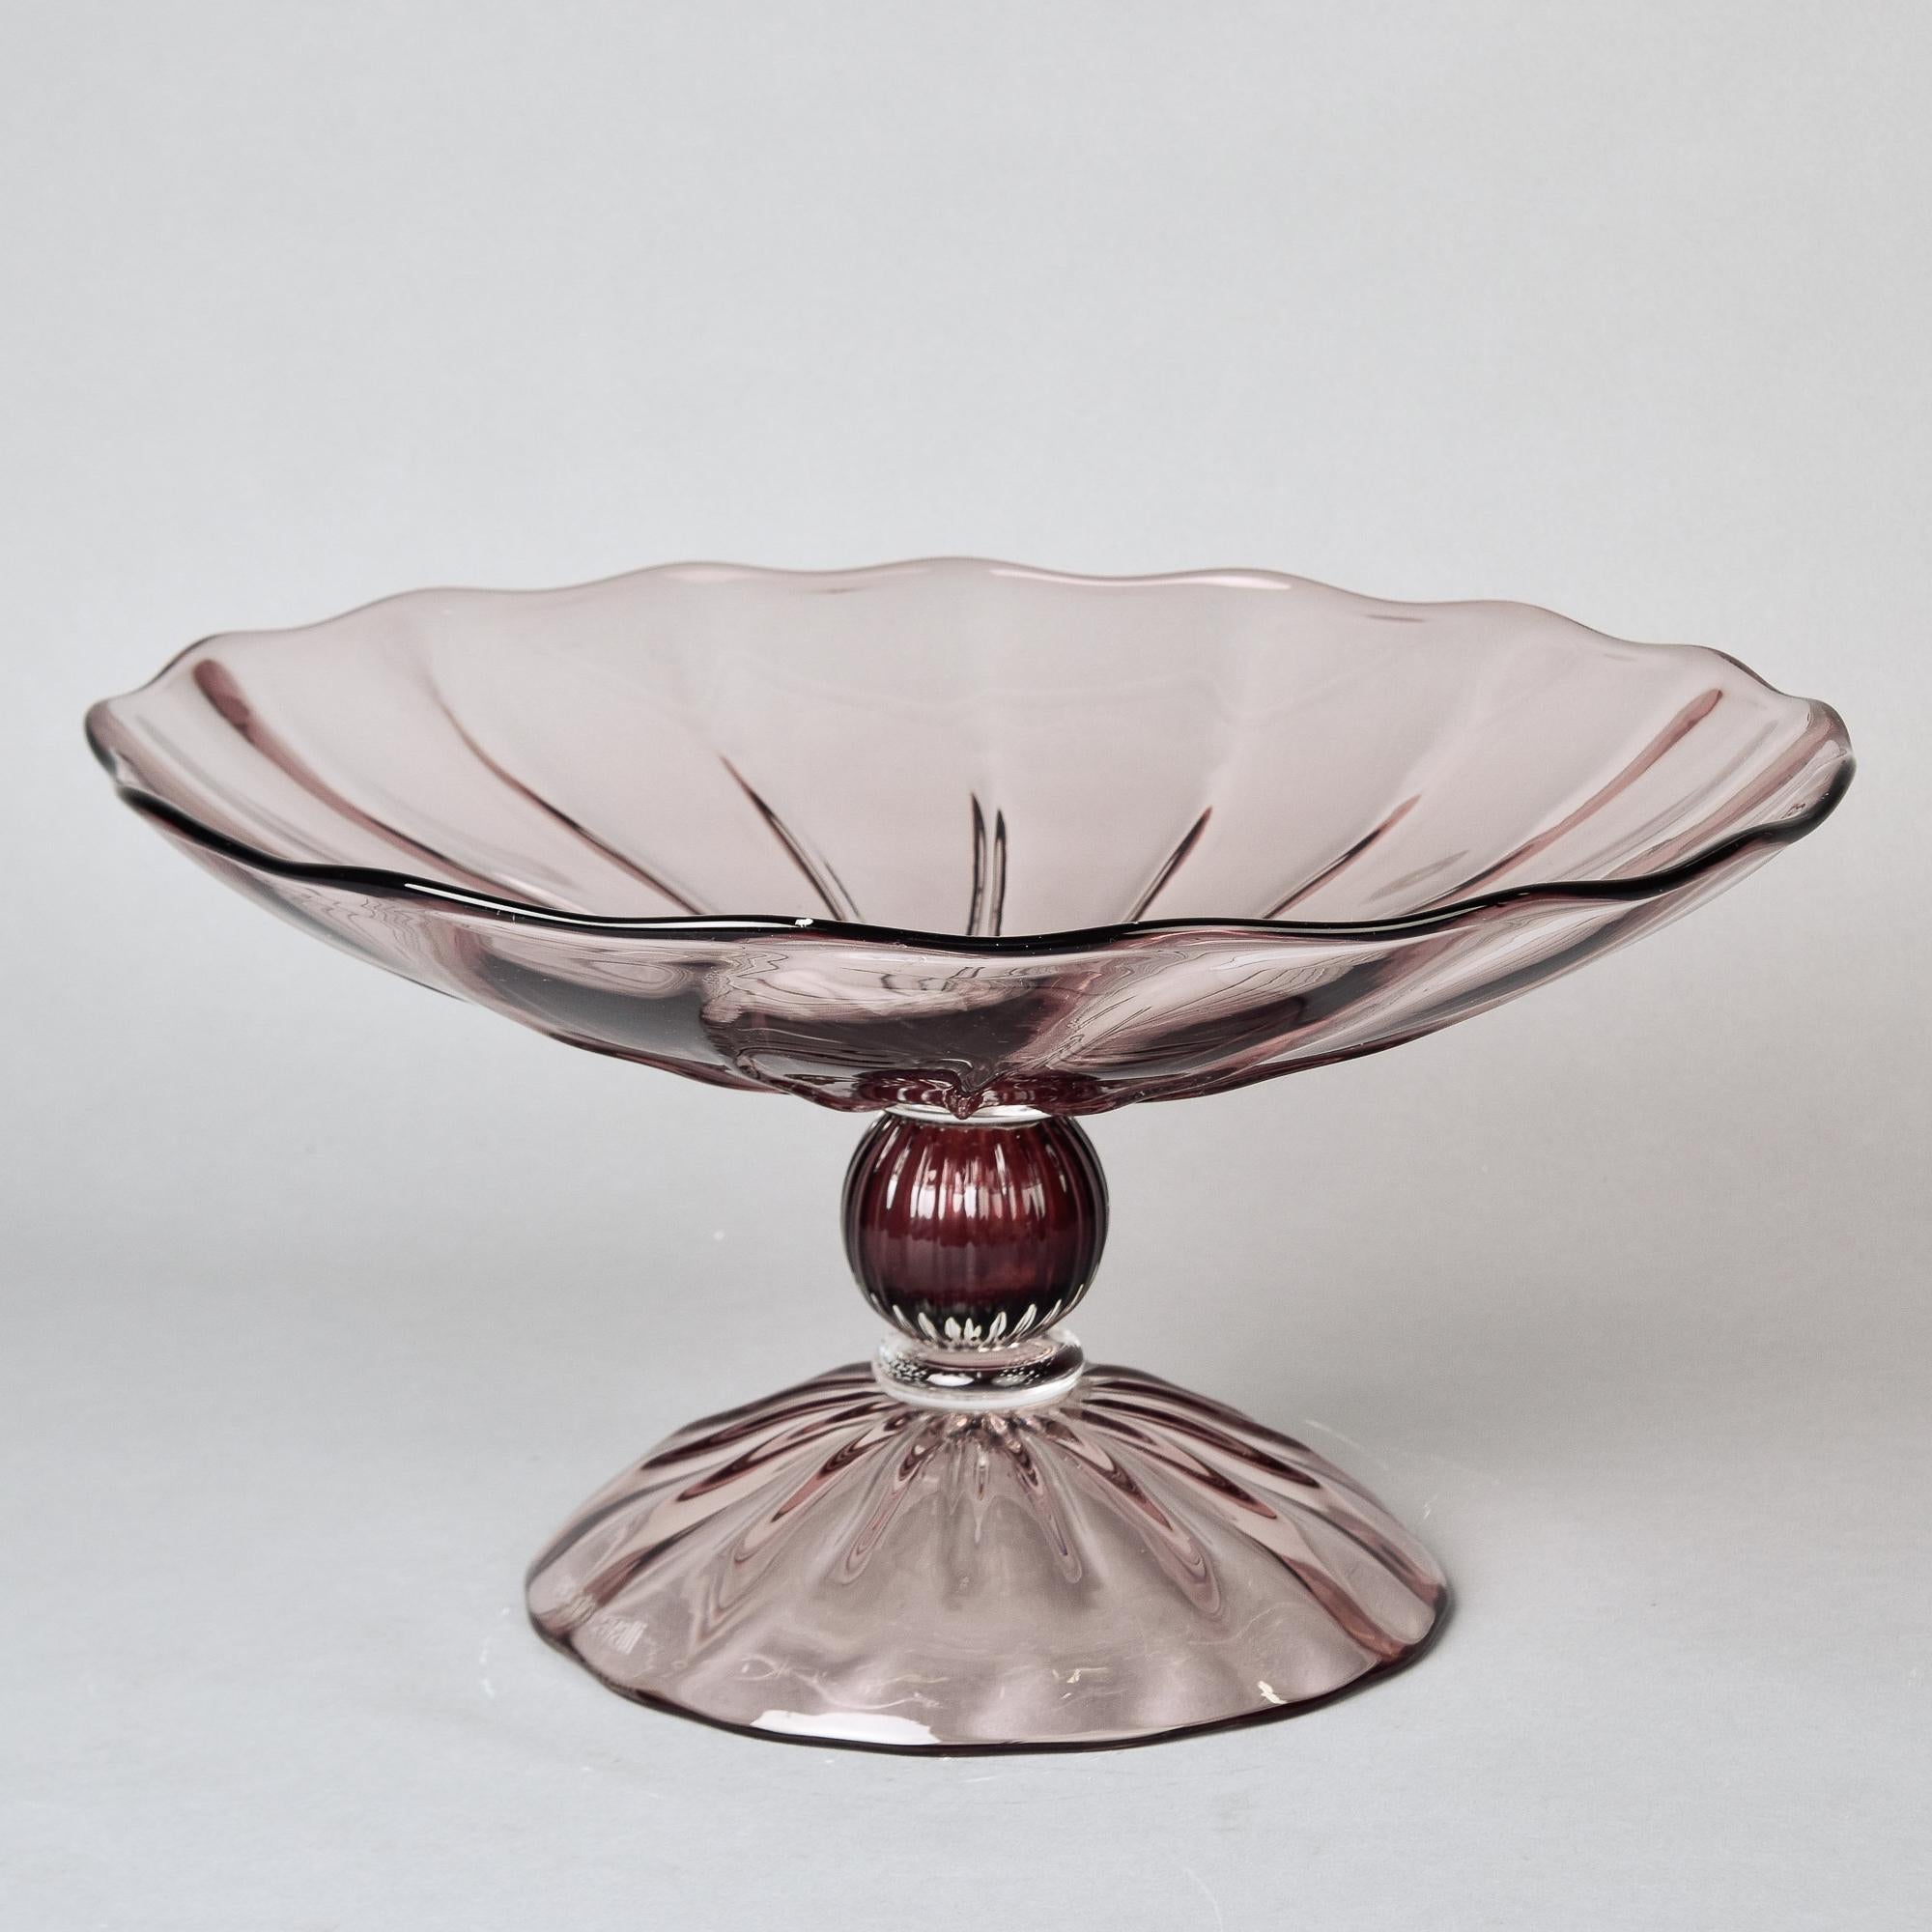 Found in Italy, this circa 2010 Murano glass tazza or pedestal bowl is marked Roberto Cavalli on the base. This pale amethyst pedestal bowl is 8.5” high and 16” diameter with subtle ribbing to the surface. No chips, cracks, flaws or repairs found.